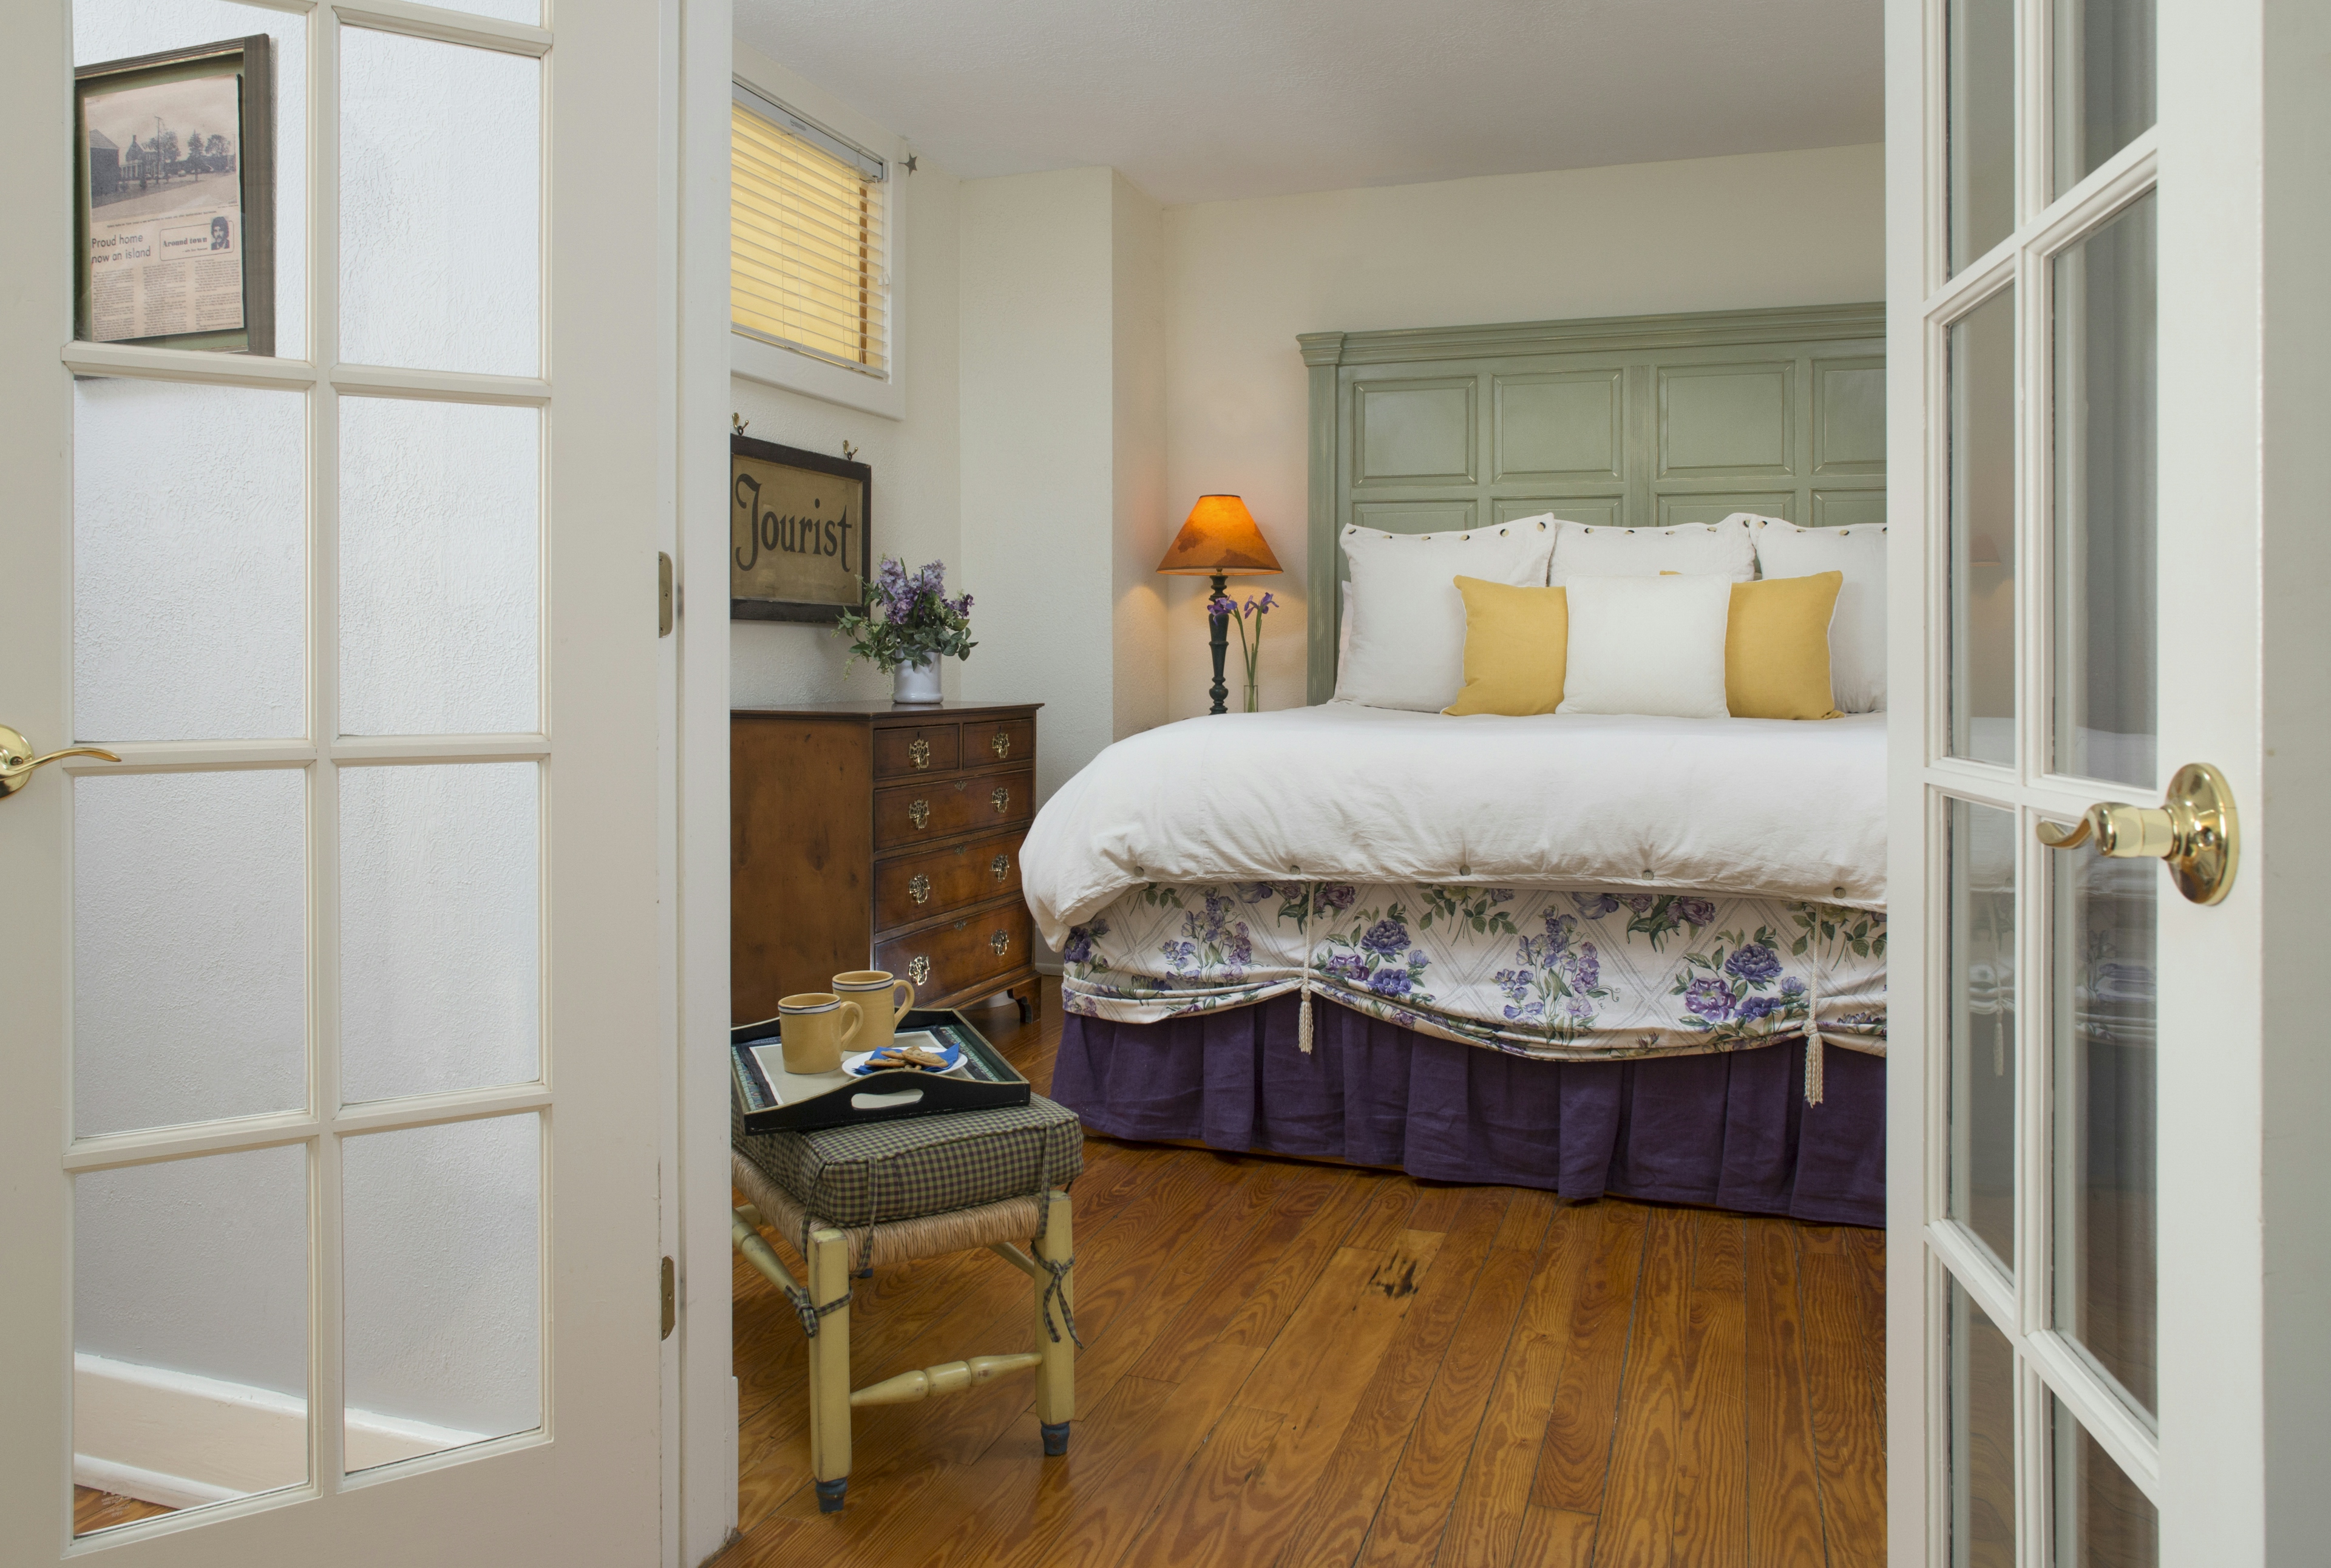 View from doorway into bedroom, beautifully appointed bed with high painted headboard, nightstand with lamp, dresser